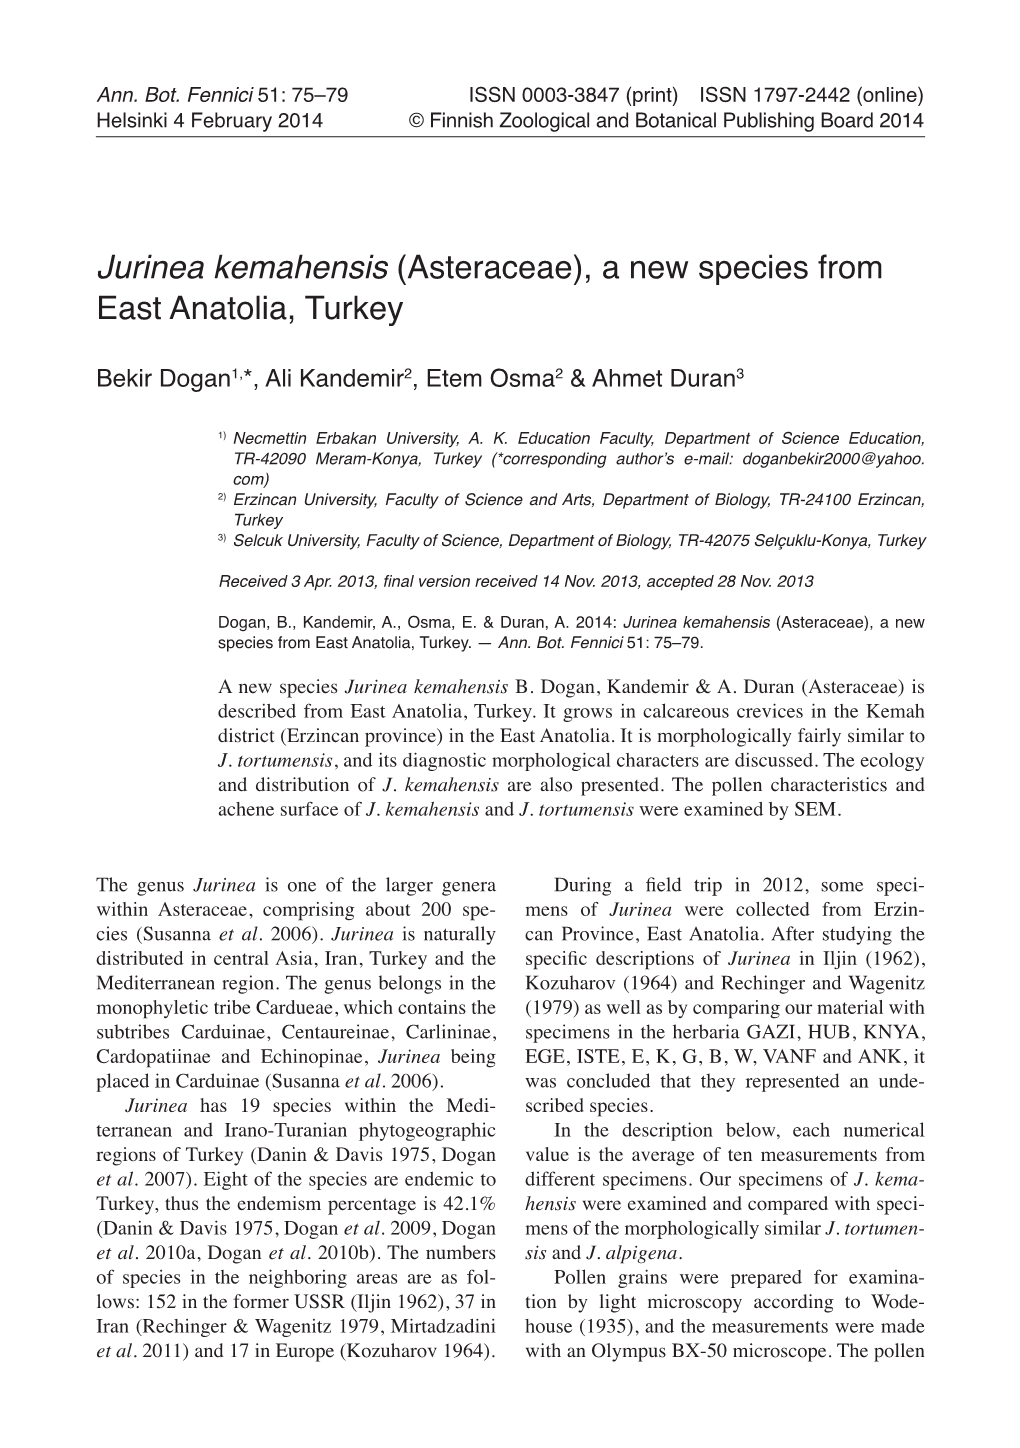 Jurinea Kemahensis (Asteraceae), a New Species from East Anatolia, Turkey